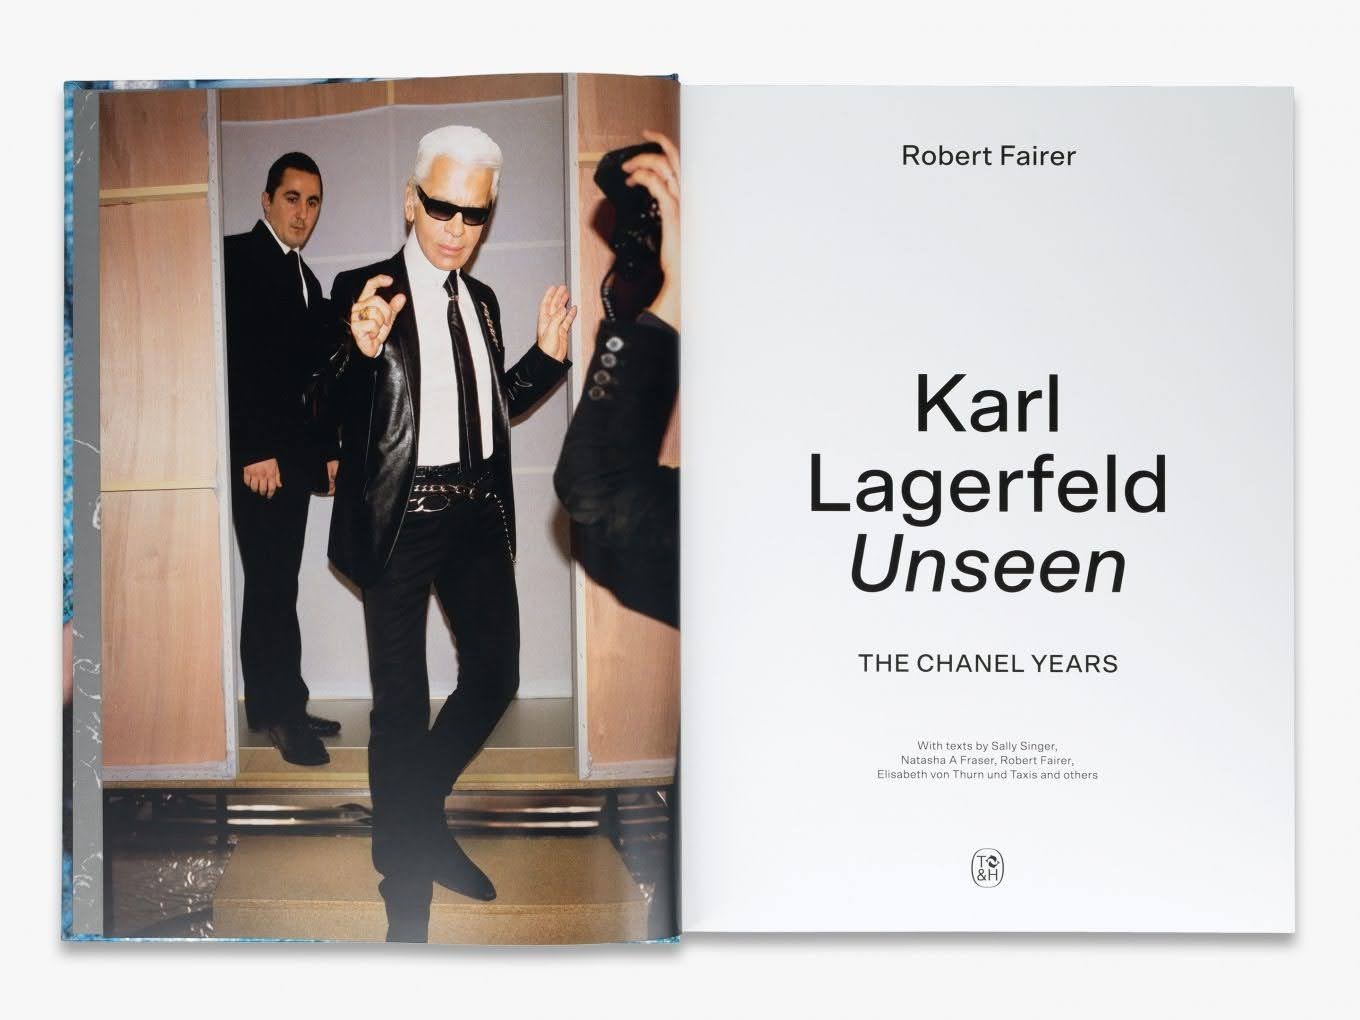 Tribute to Karl Lagerfeld, an outstanding artist and a marketing